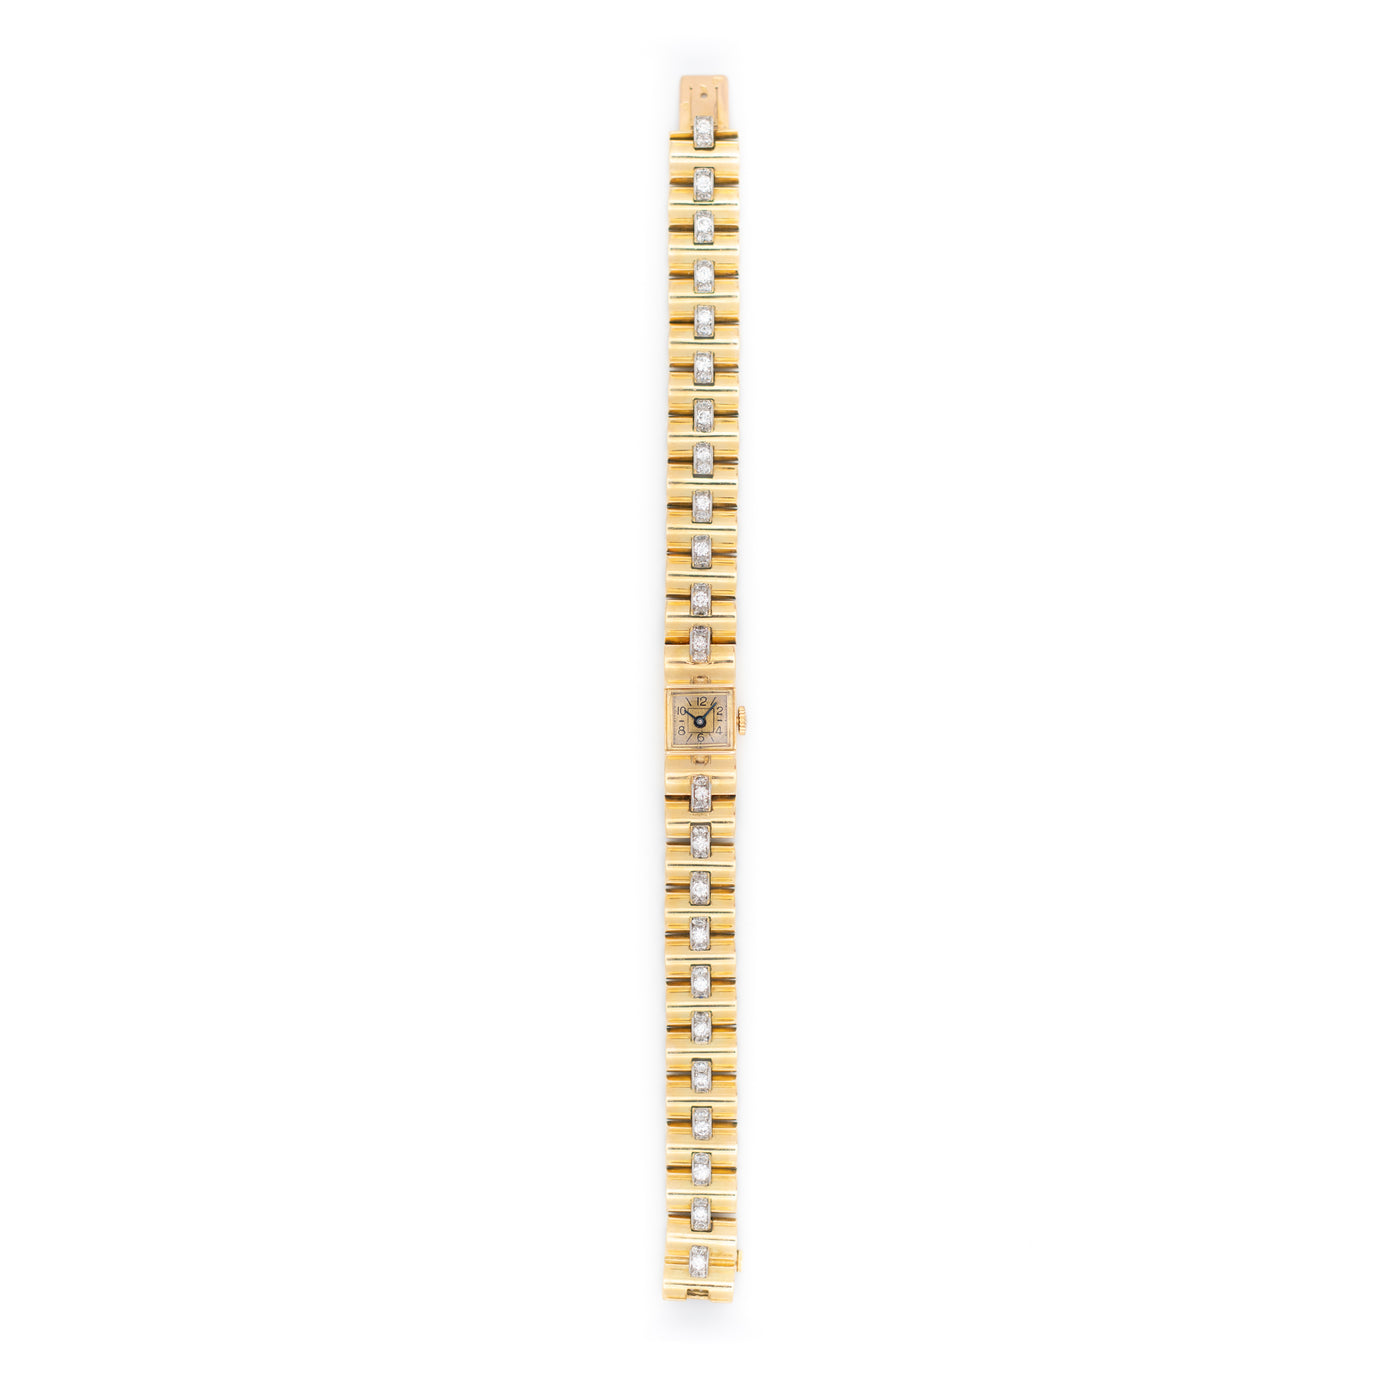 VAN CLEEF & ARPELS 18K YELLOW GOLD AND 3.0CTS DIAMOND TIMEPIECE c.1940s